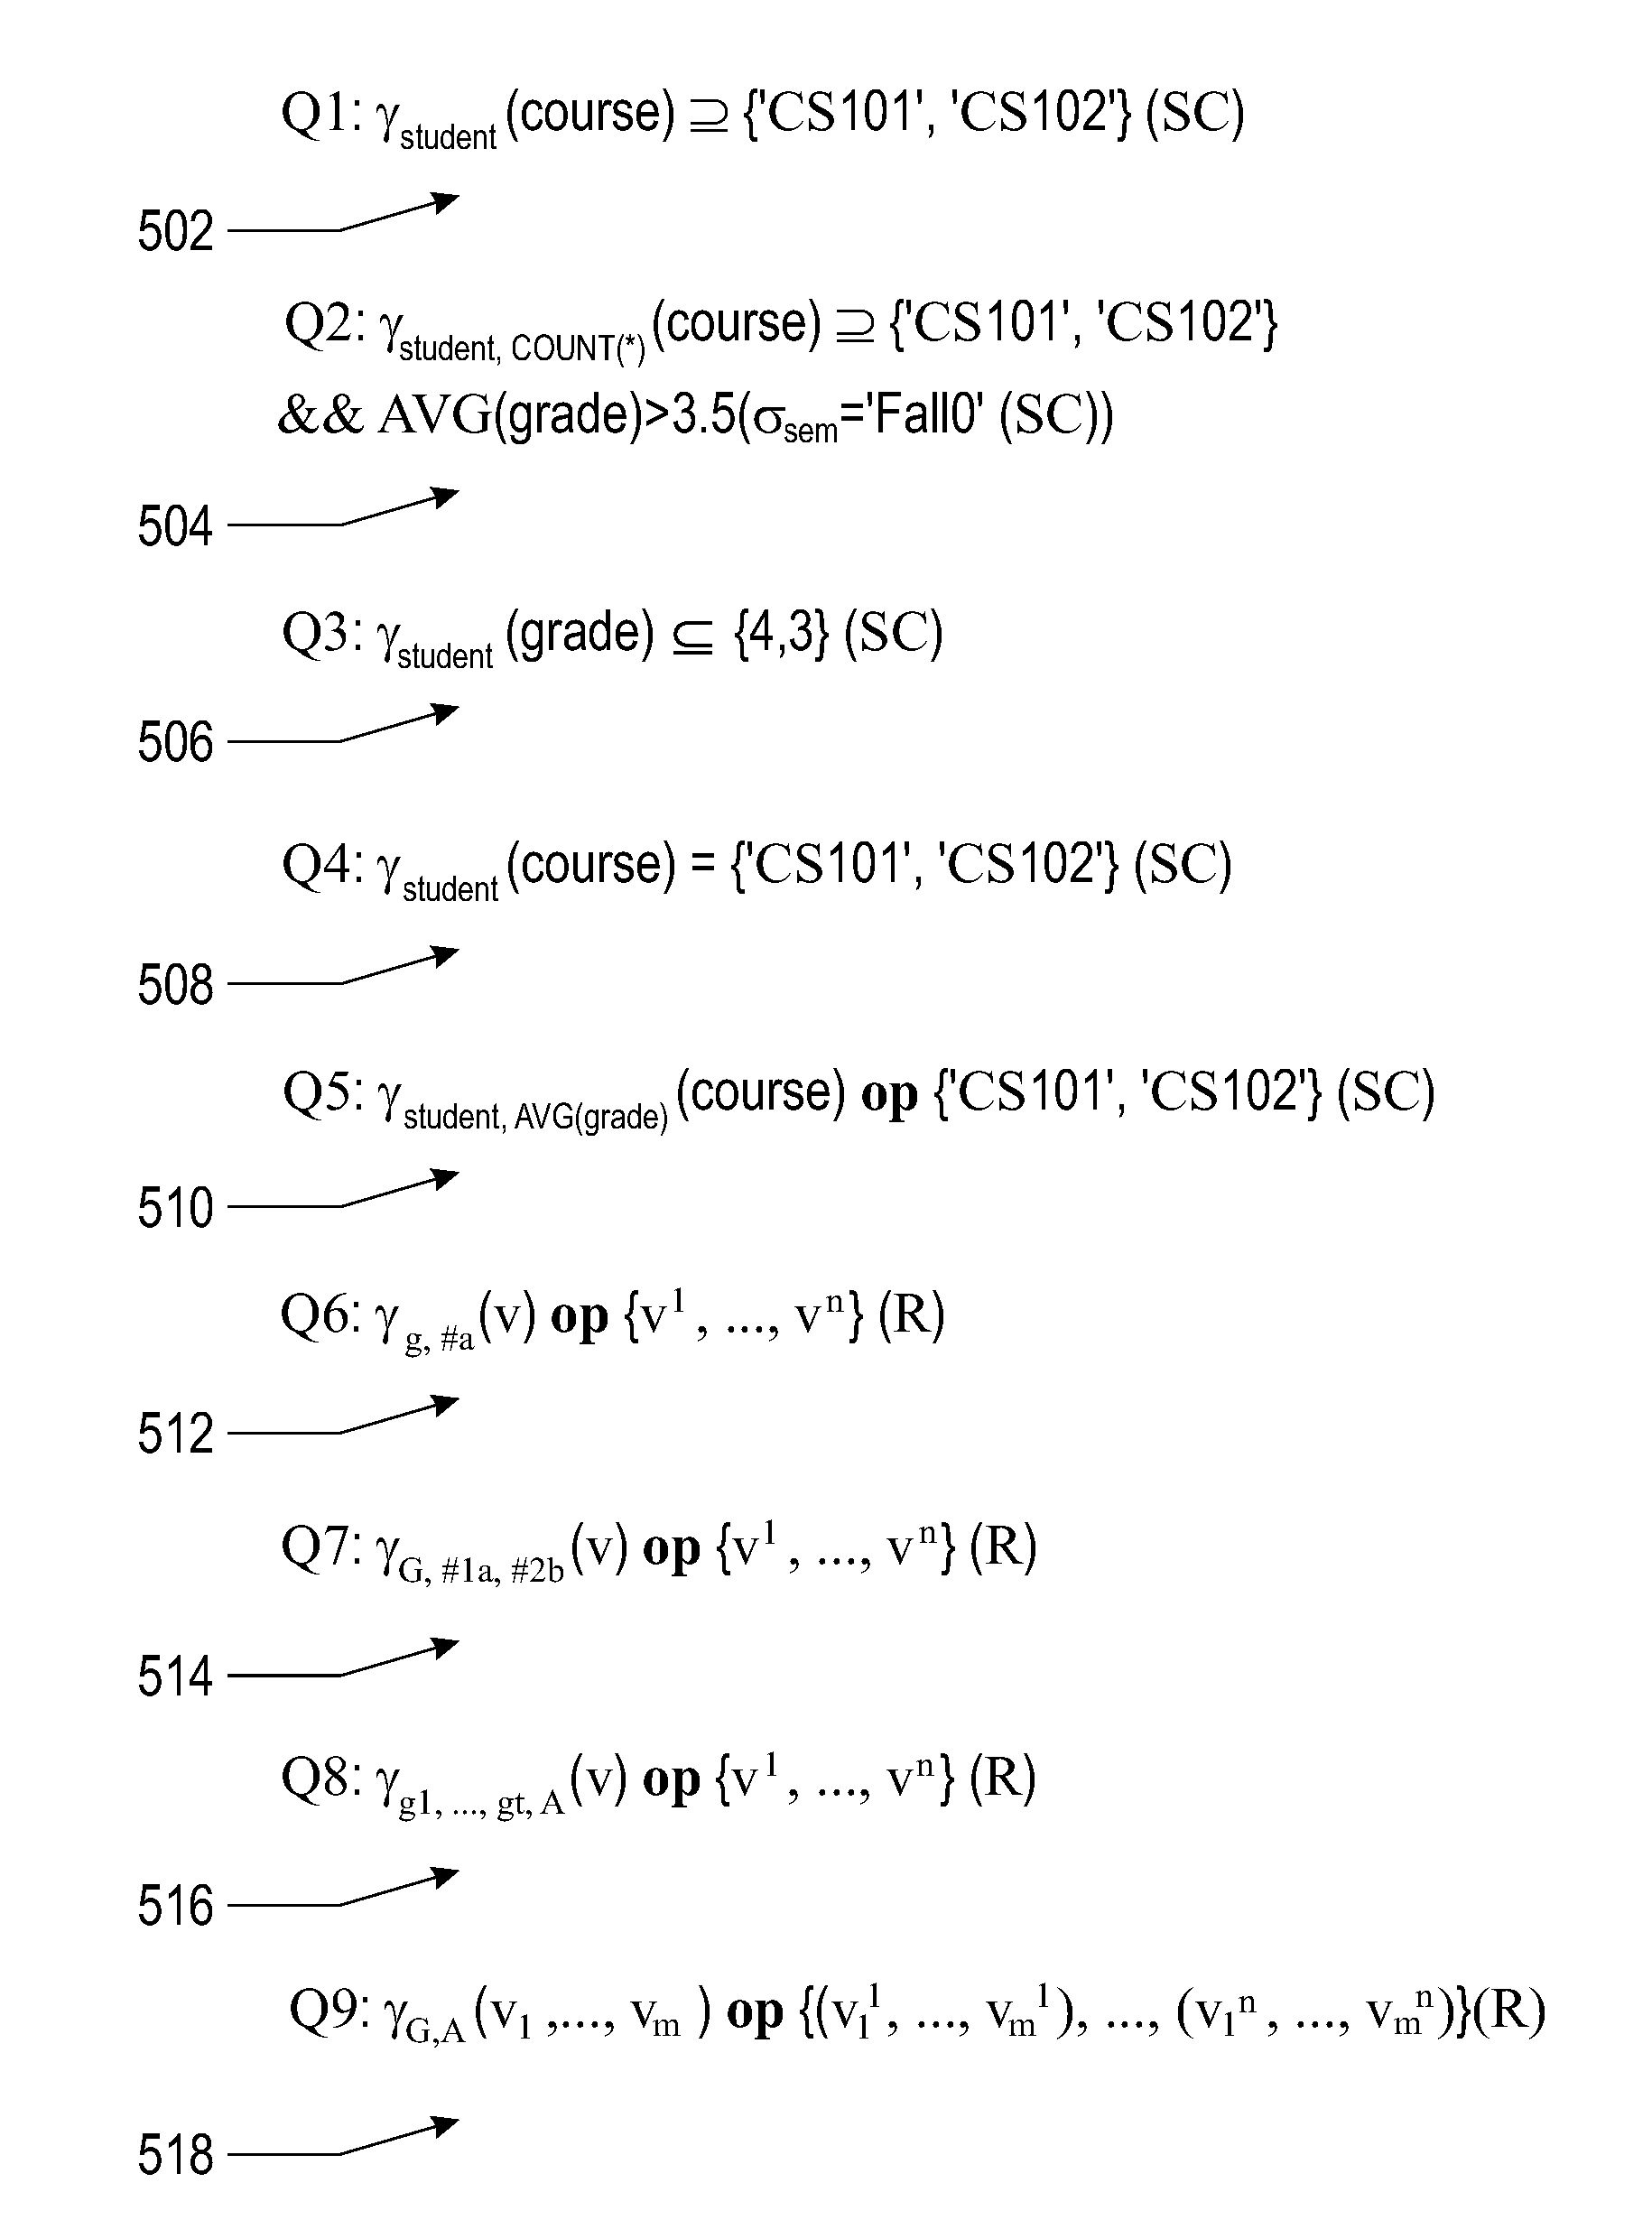 Set-level comparisons in dynamically formed groups